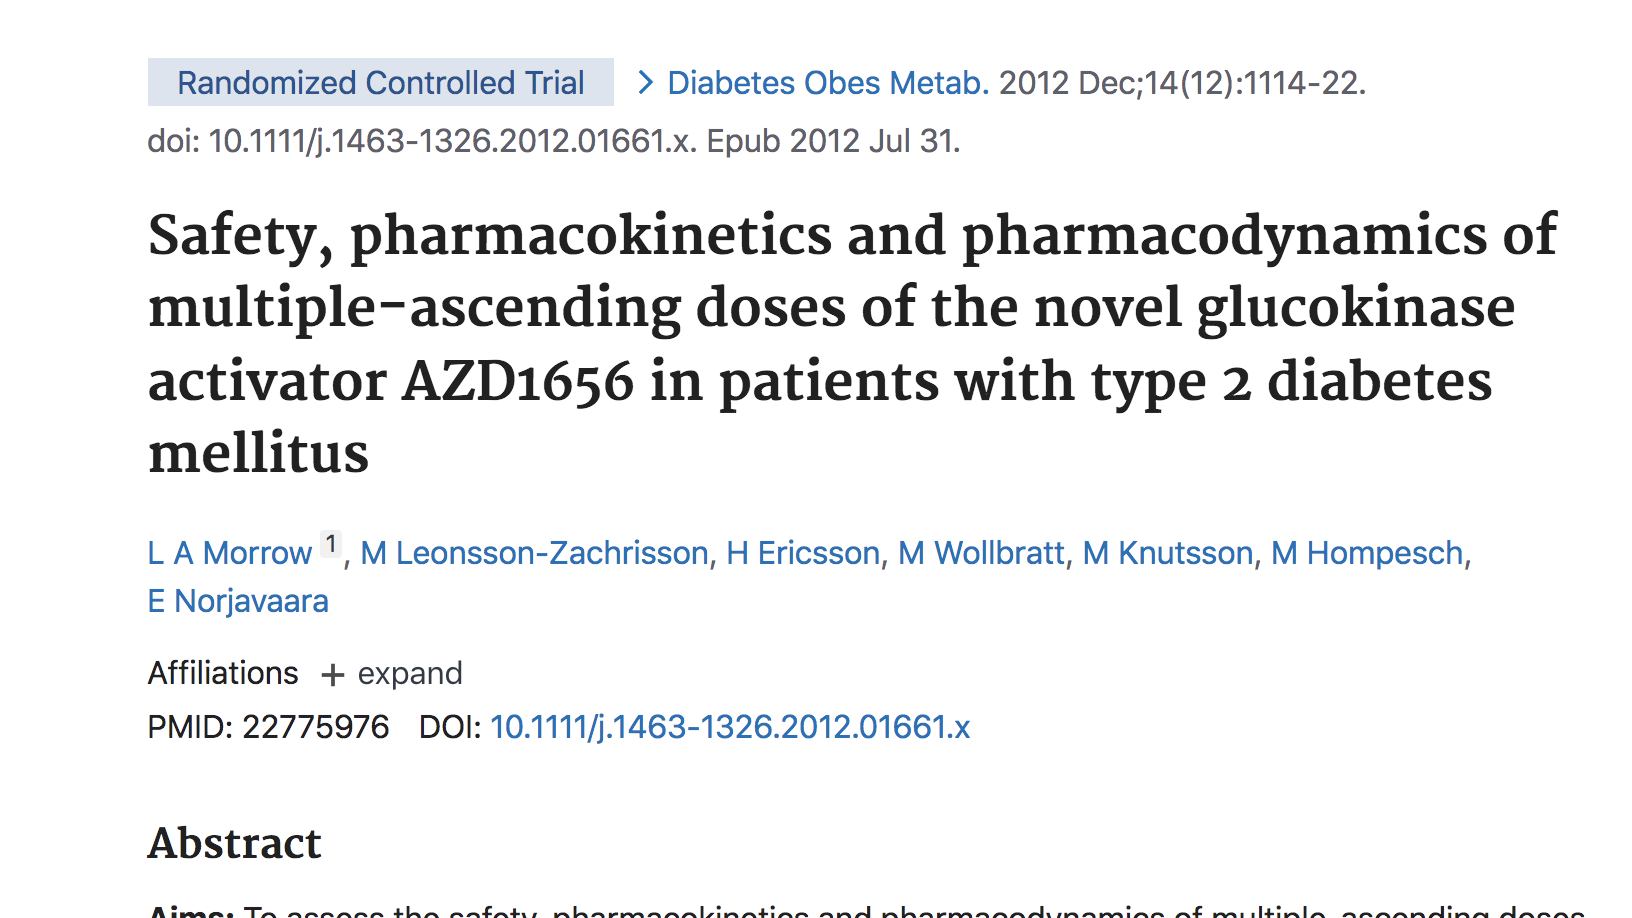 image of Safety, pharmacokinetics and pharmacodynamics of multiple-ascending doses of the novel glucokinase activator AZD1656 in patients with type 2 diabetes mellitus.